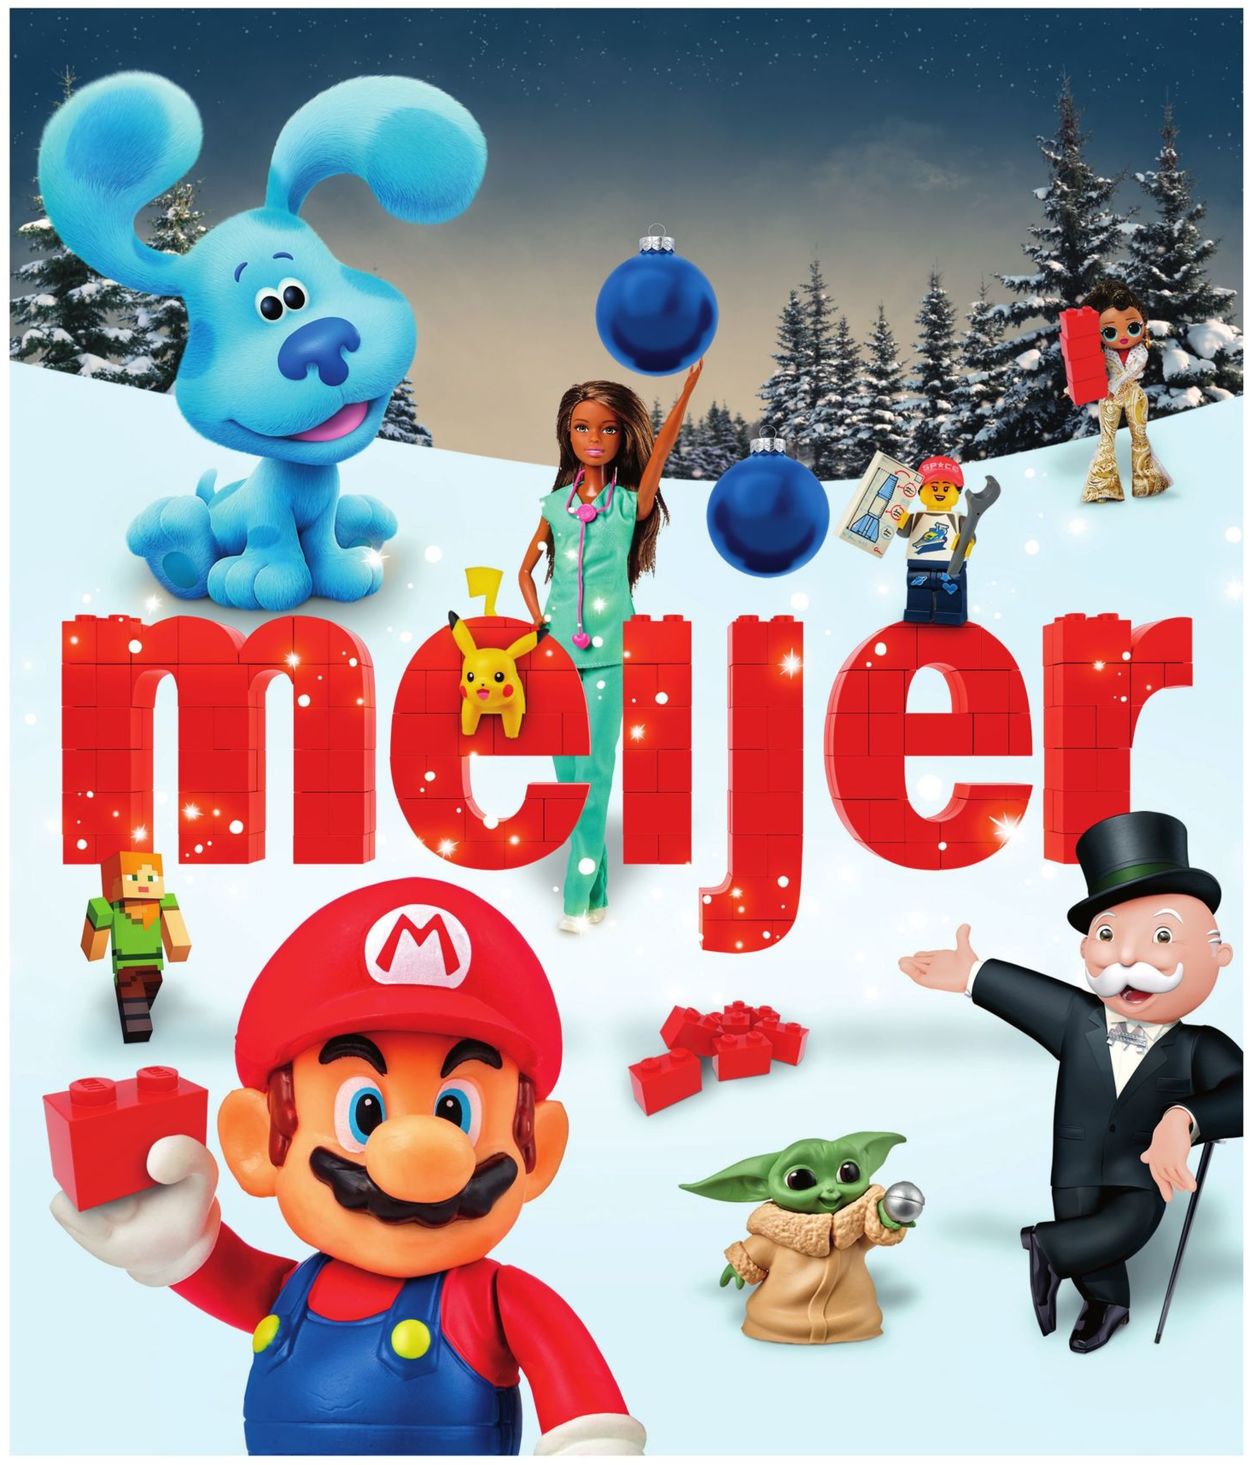 Meijer Ad from 11/01/2020